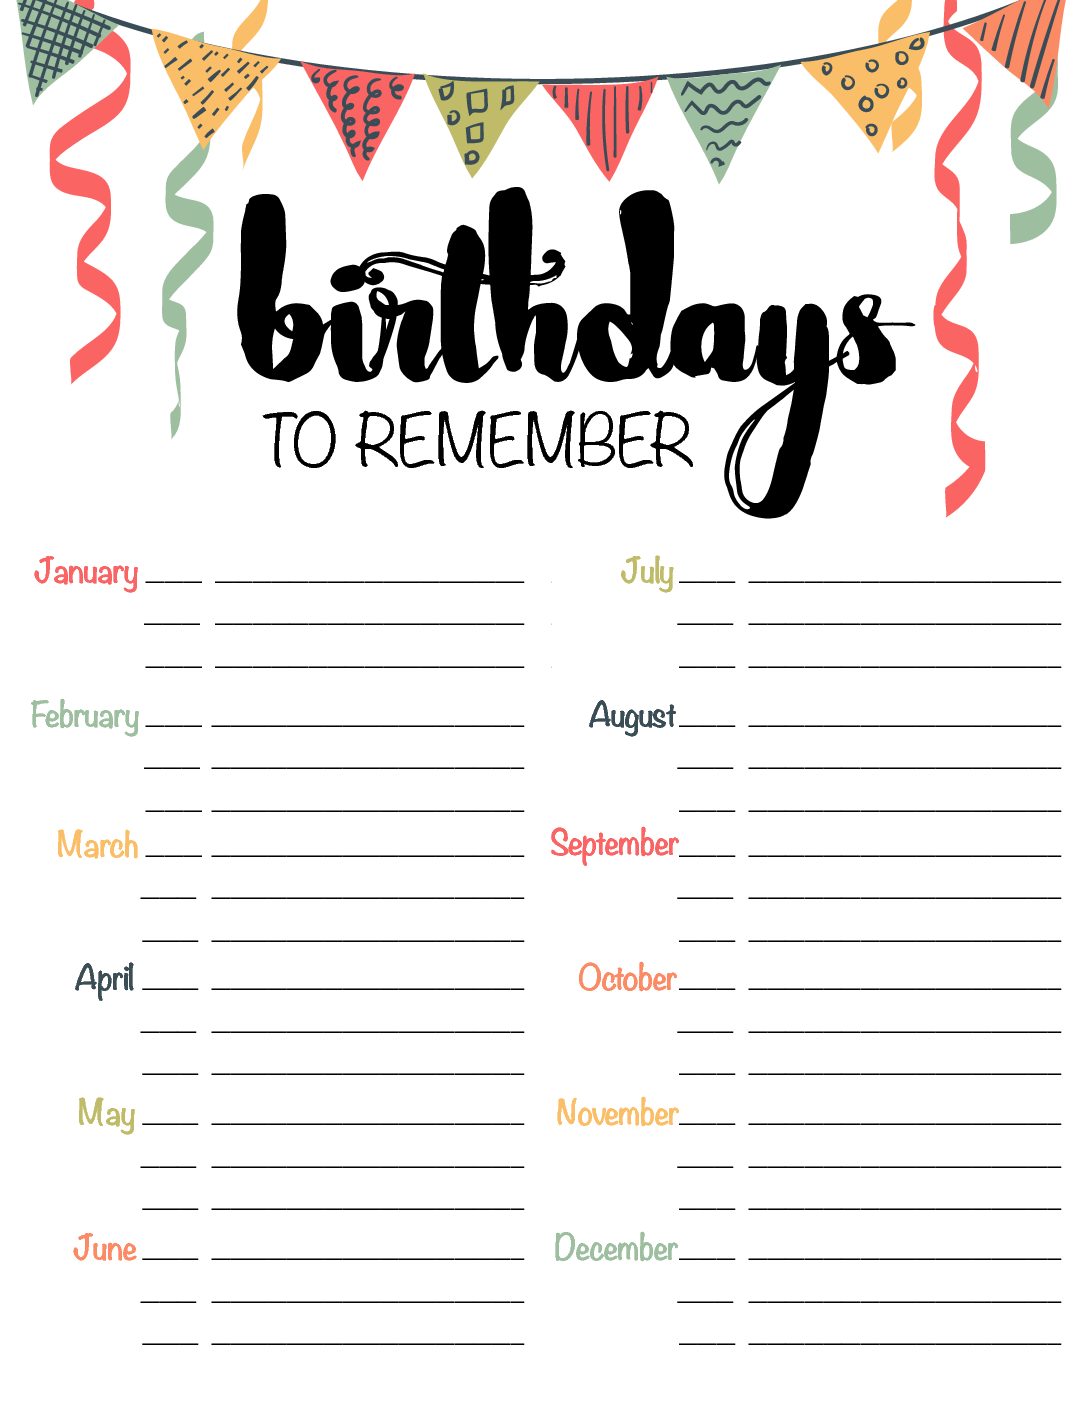 birthday-reminder-free-printable-six-clever-sisters